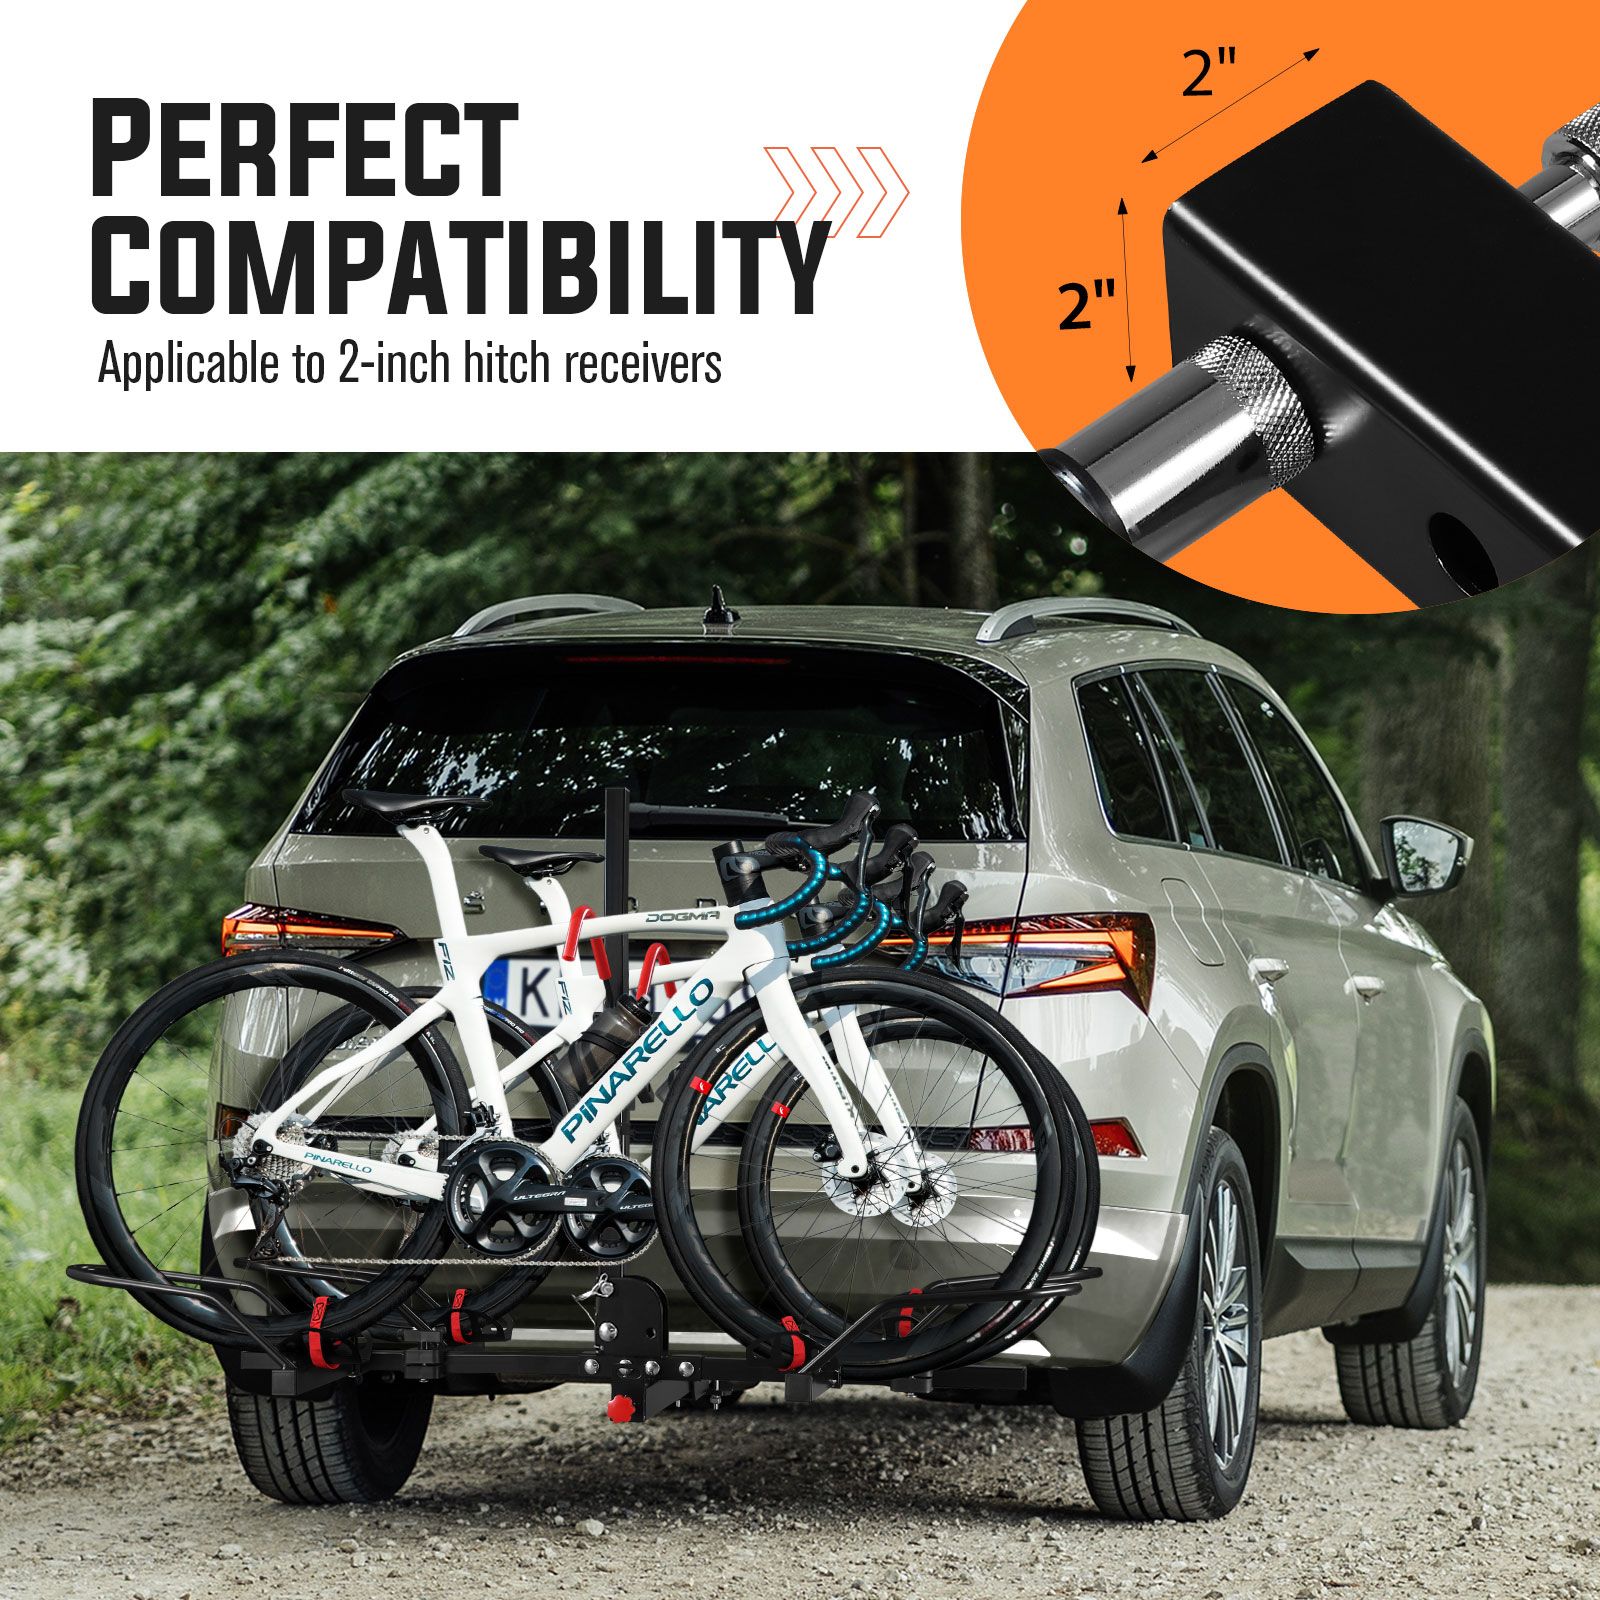 2 Ebike Rack Mountain Bicycle Carrier Stand Rear Electric Car Mount Storage Platform Holder 2 Inch Foldable Tilt with Lock